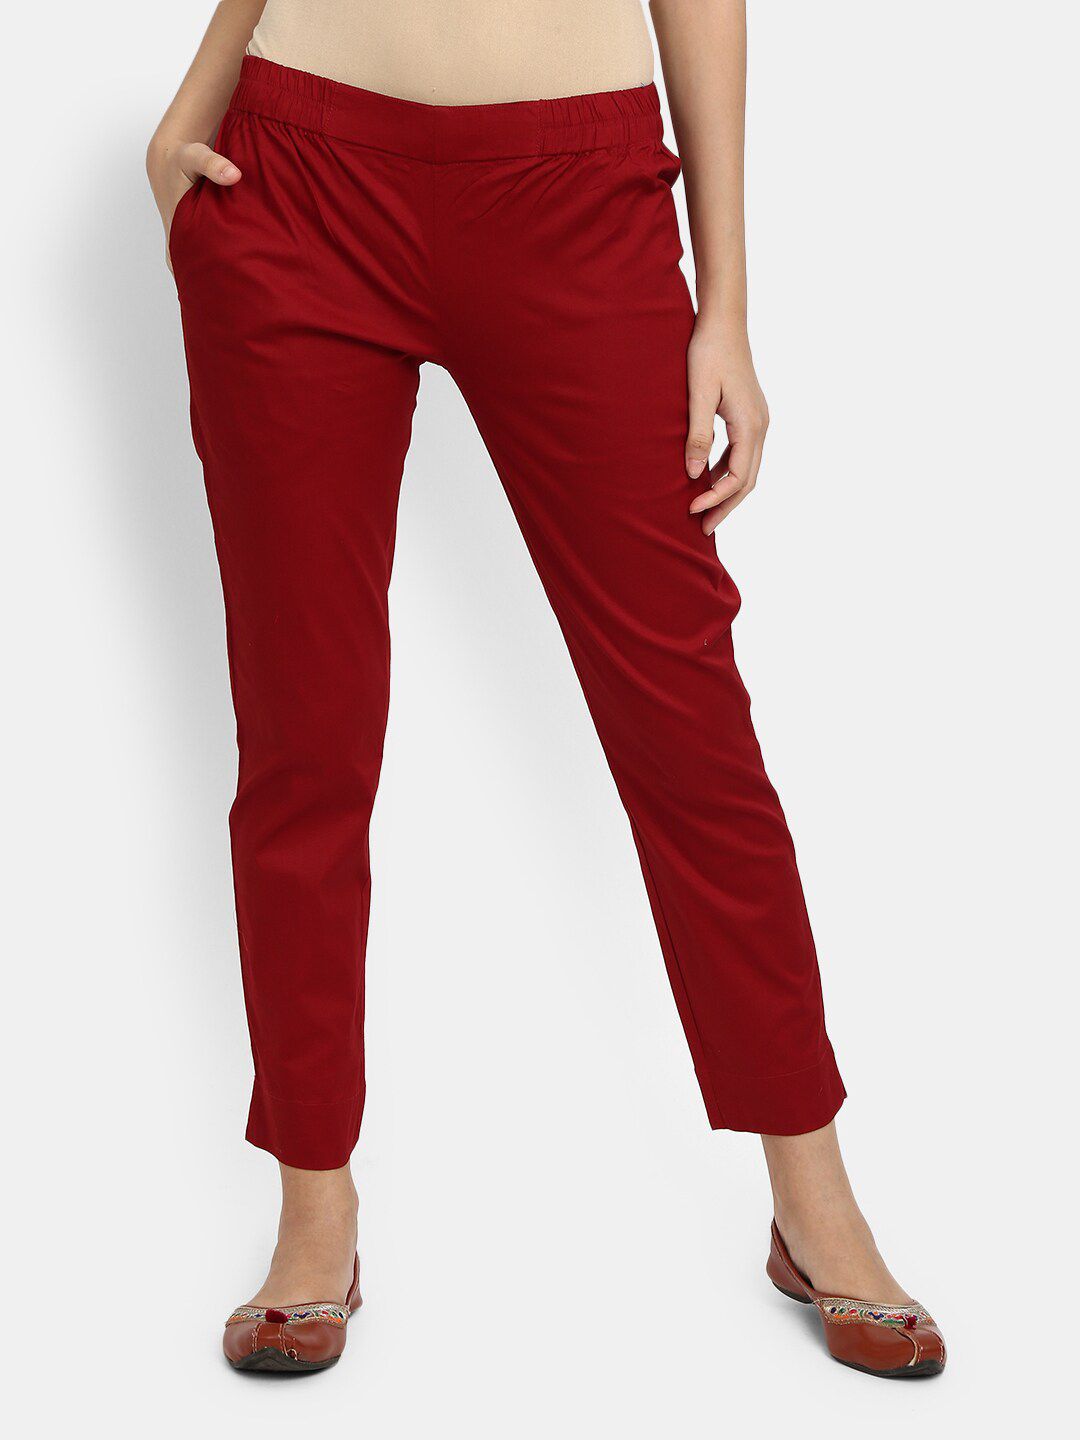 V-Mart Women Maroon Solid Cotton Trousers Price in India